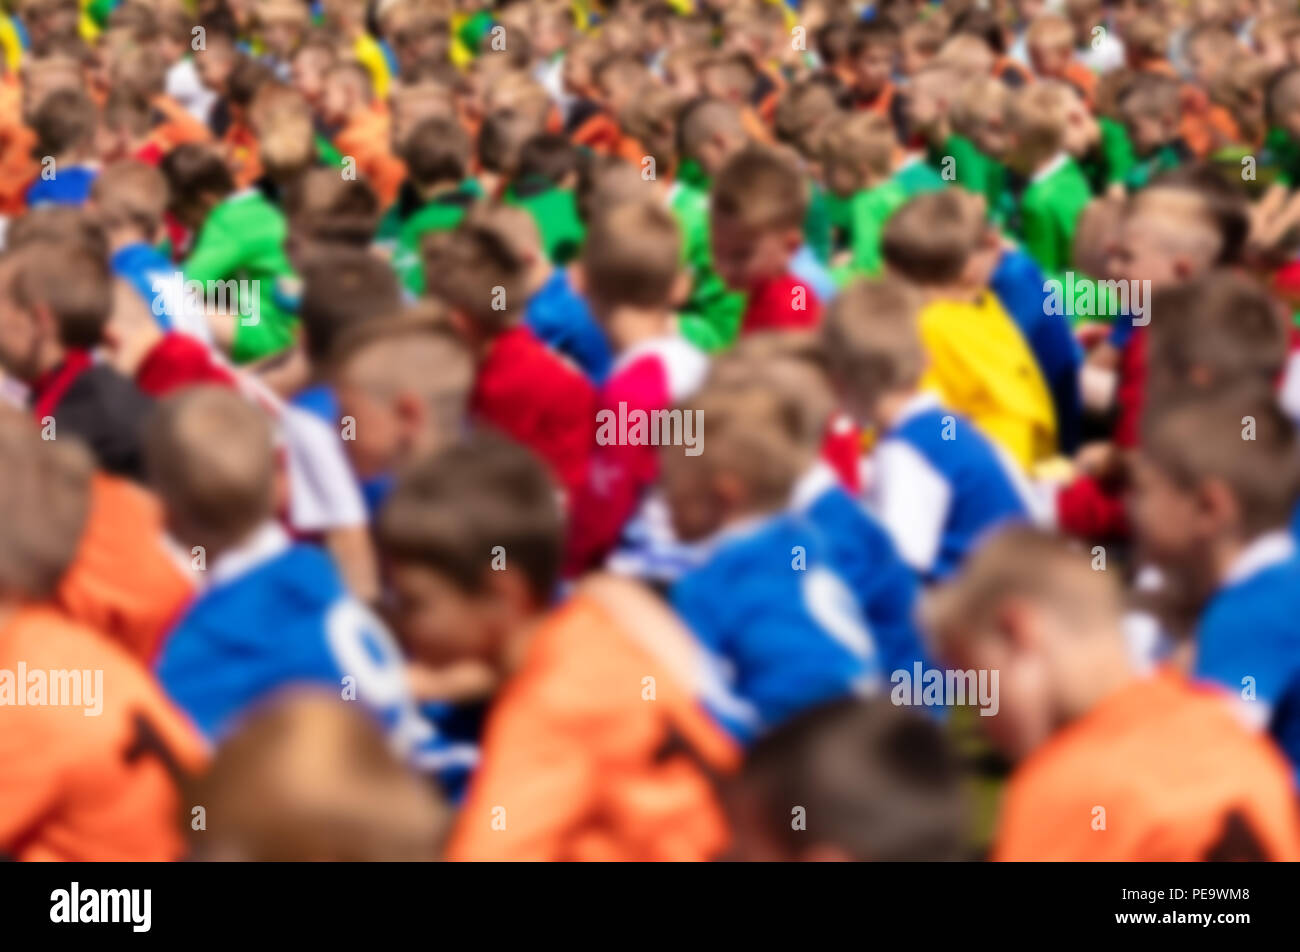 Kids Sport Football Players Sitting on a Sports Field. Youth Football Background. Soccer Tournament for Kids Stock Photo